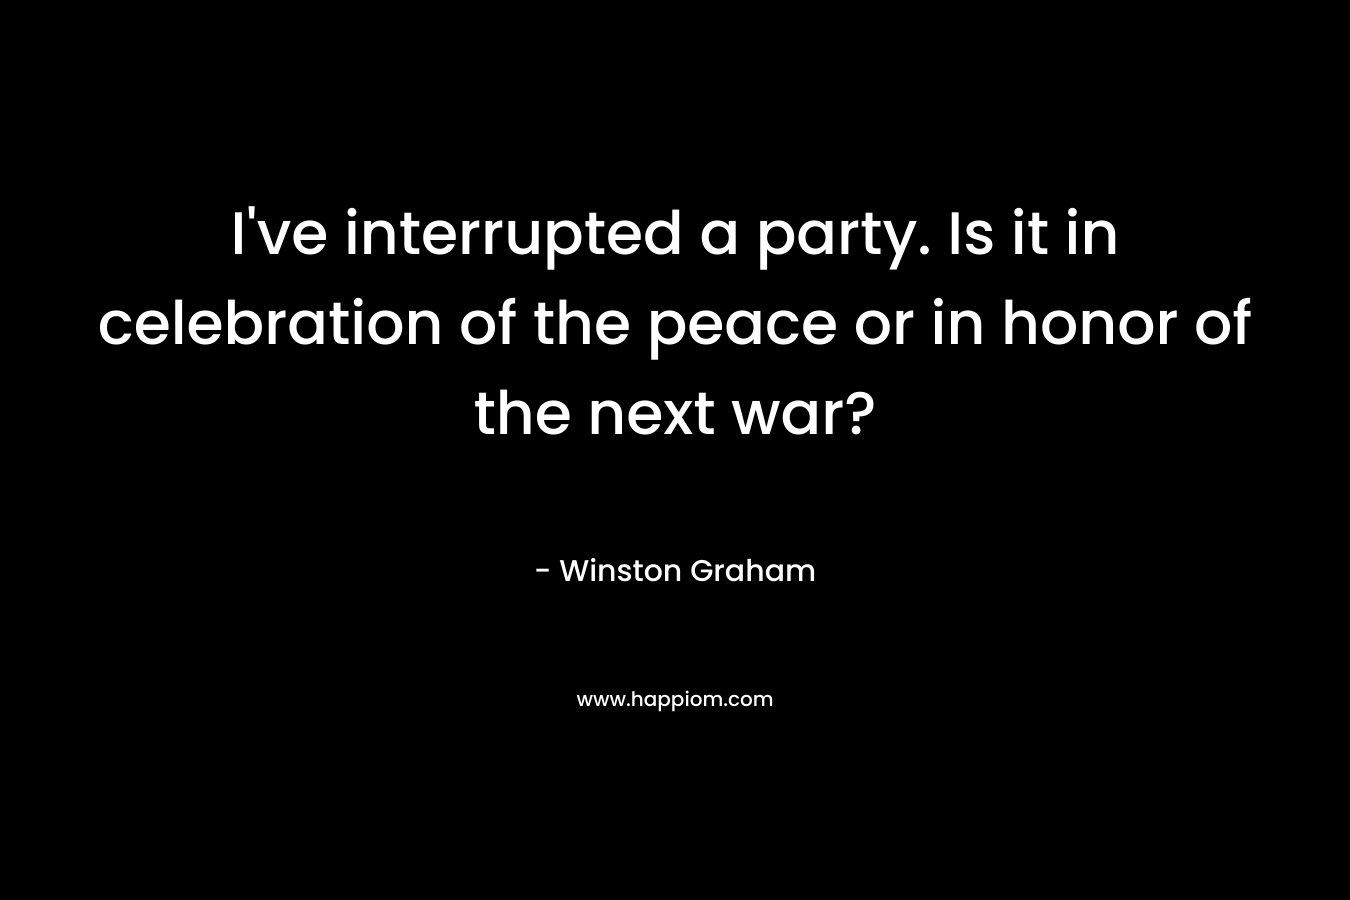 I've interrupted a party. Is it in celebration of the peace or in honor of the next war?